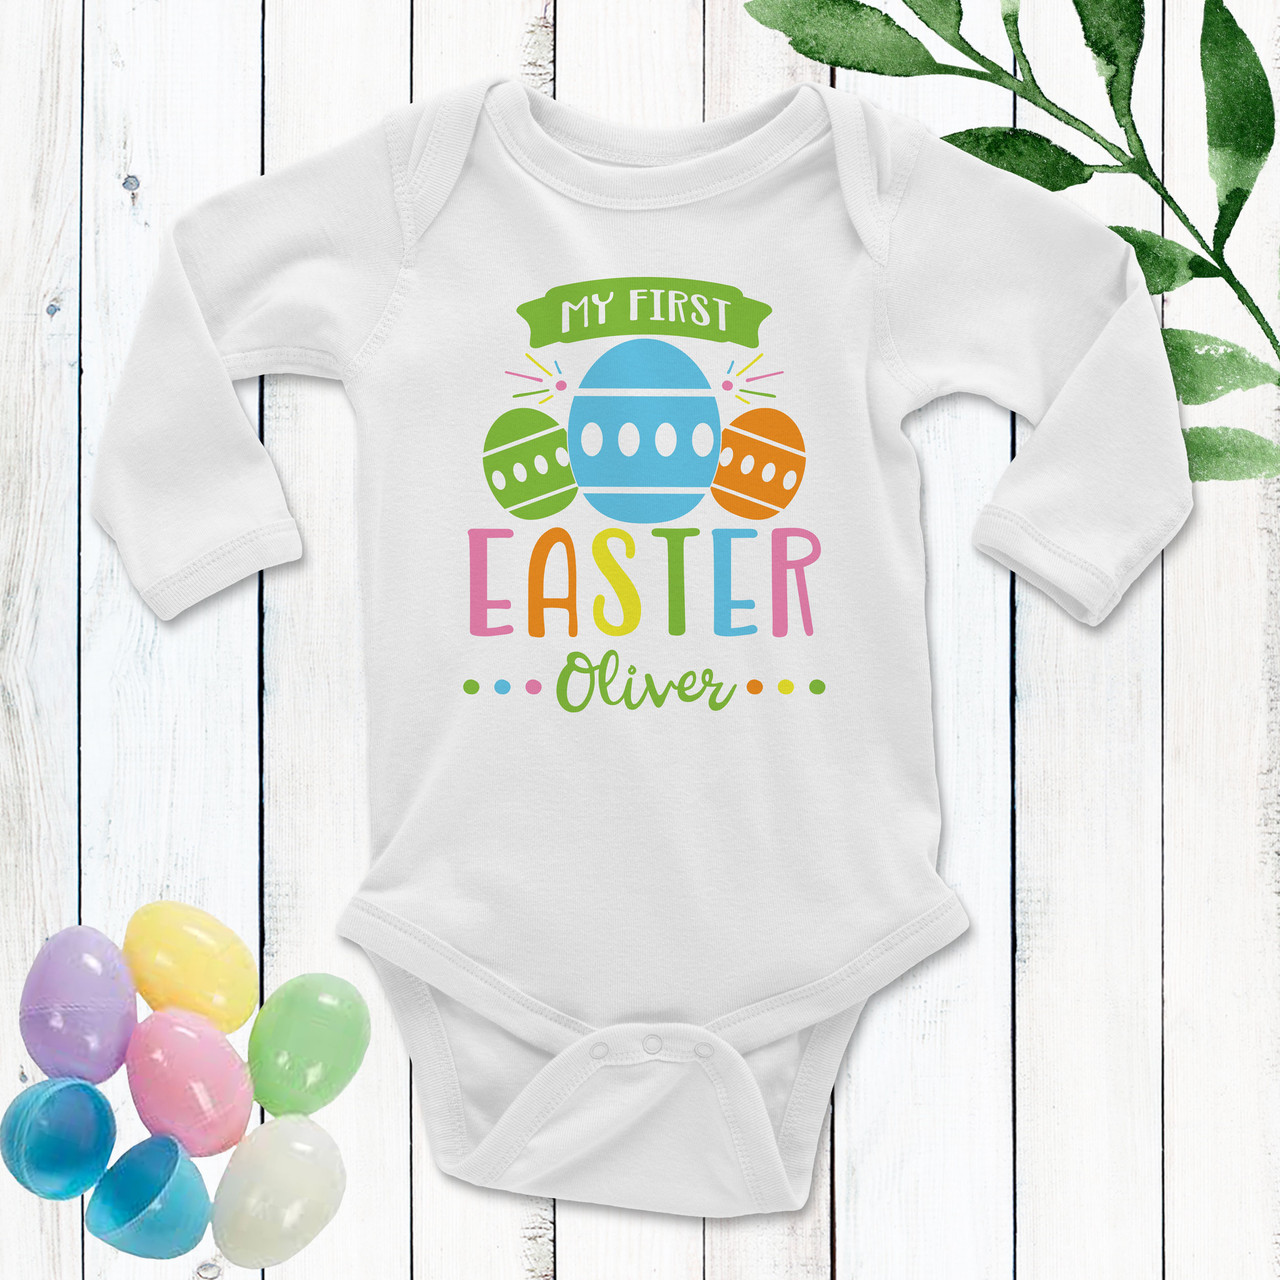 Easter Boy Clothing, Easter Clothes Kids